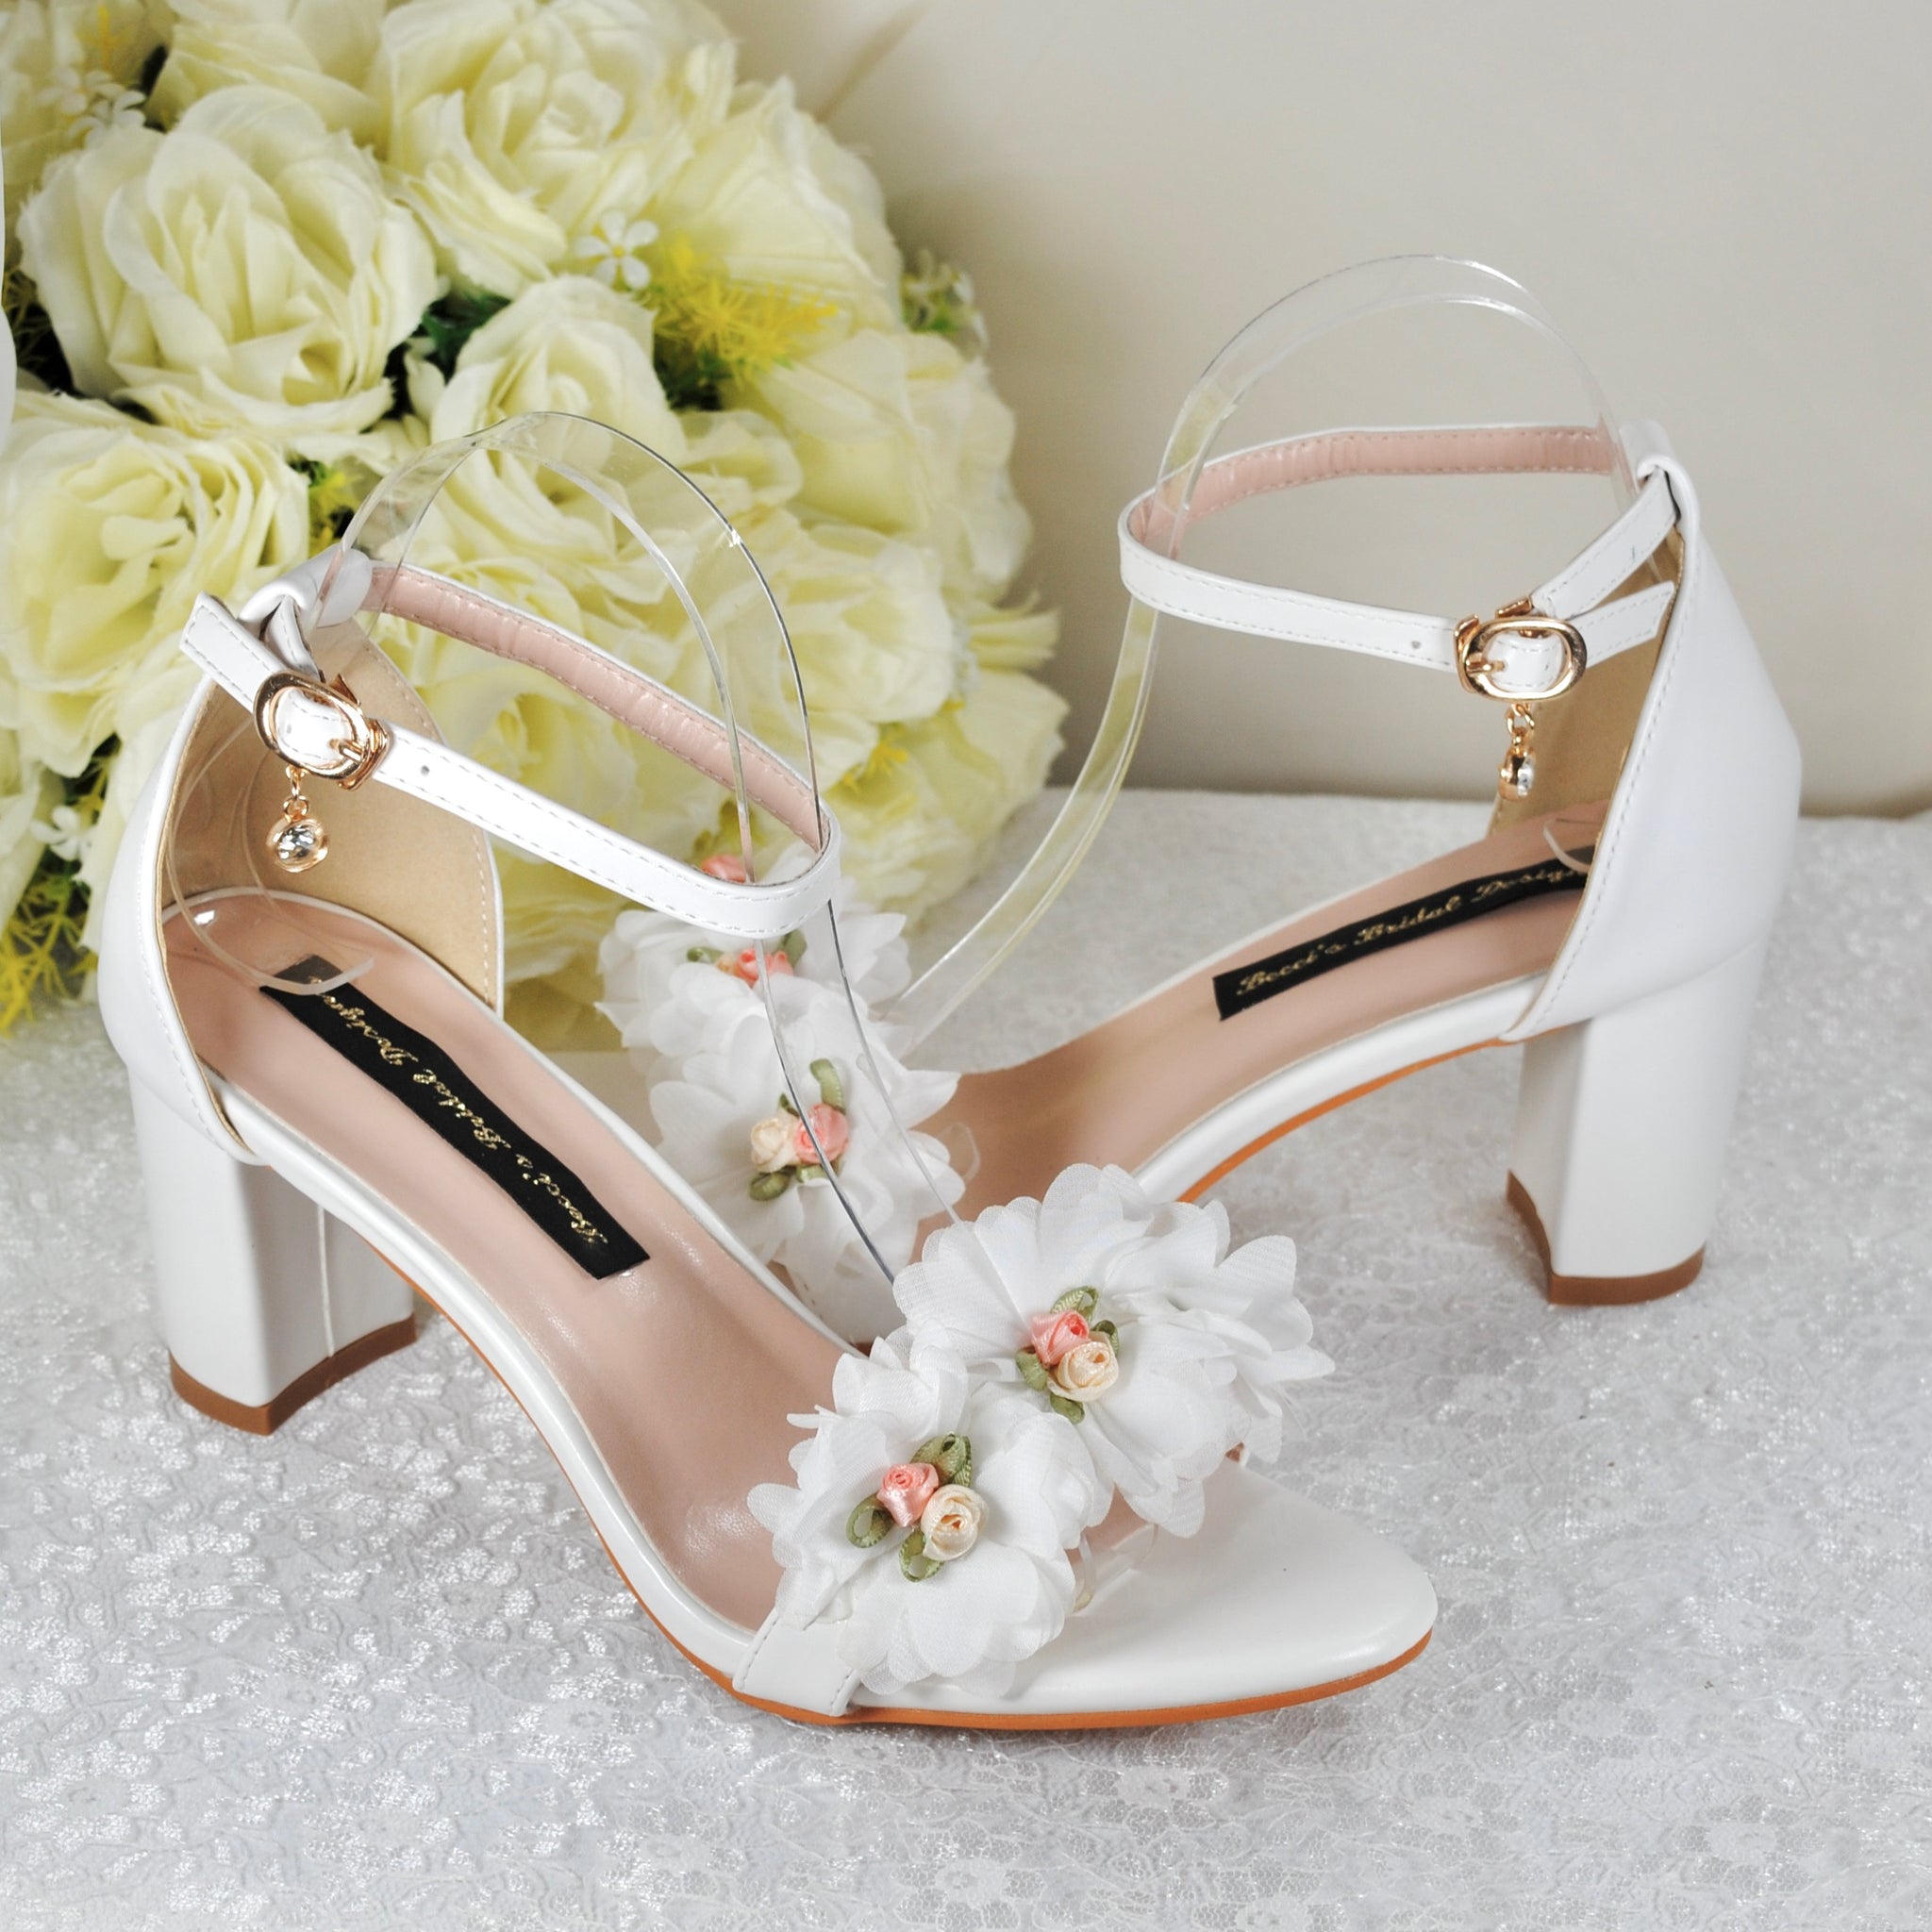 Slingback Kitten Heel Bridal Shoes with Asymmetric Bow